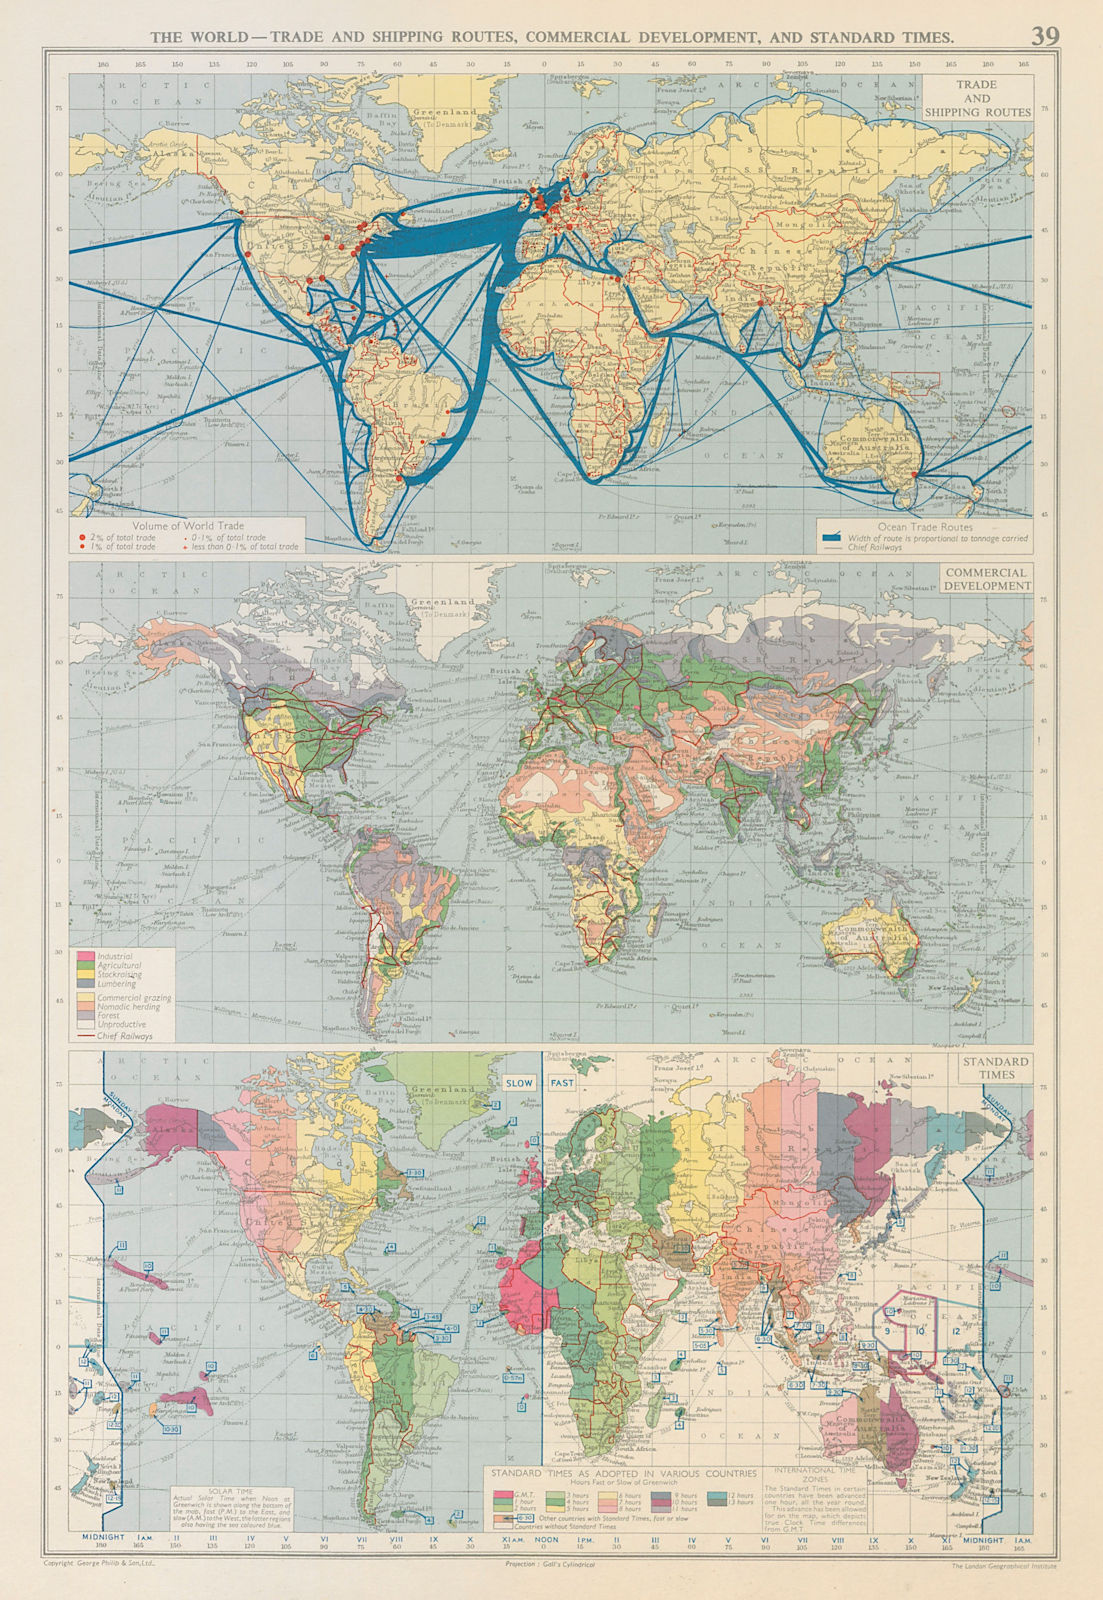 World - Trade & Shipping Routes, Commercial Development. Standard Times 1959 map